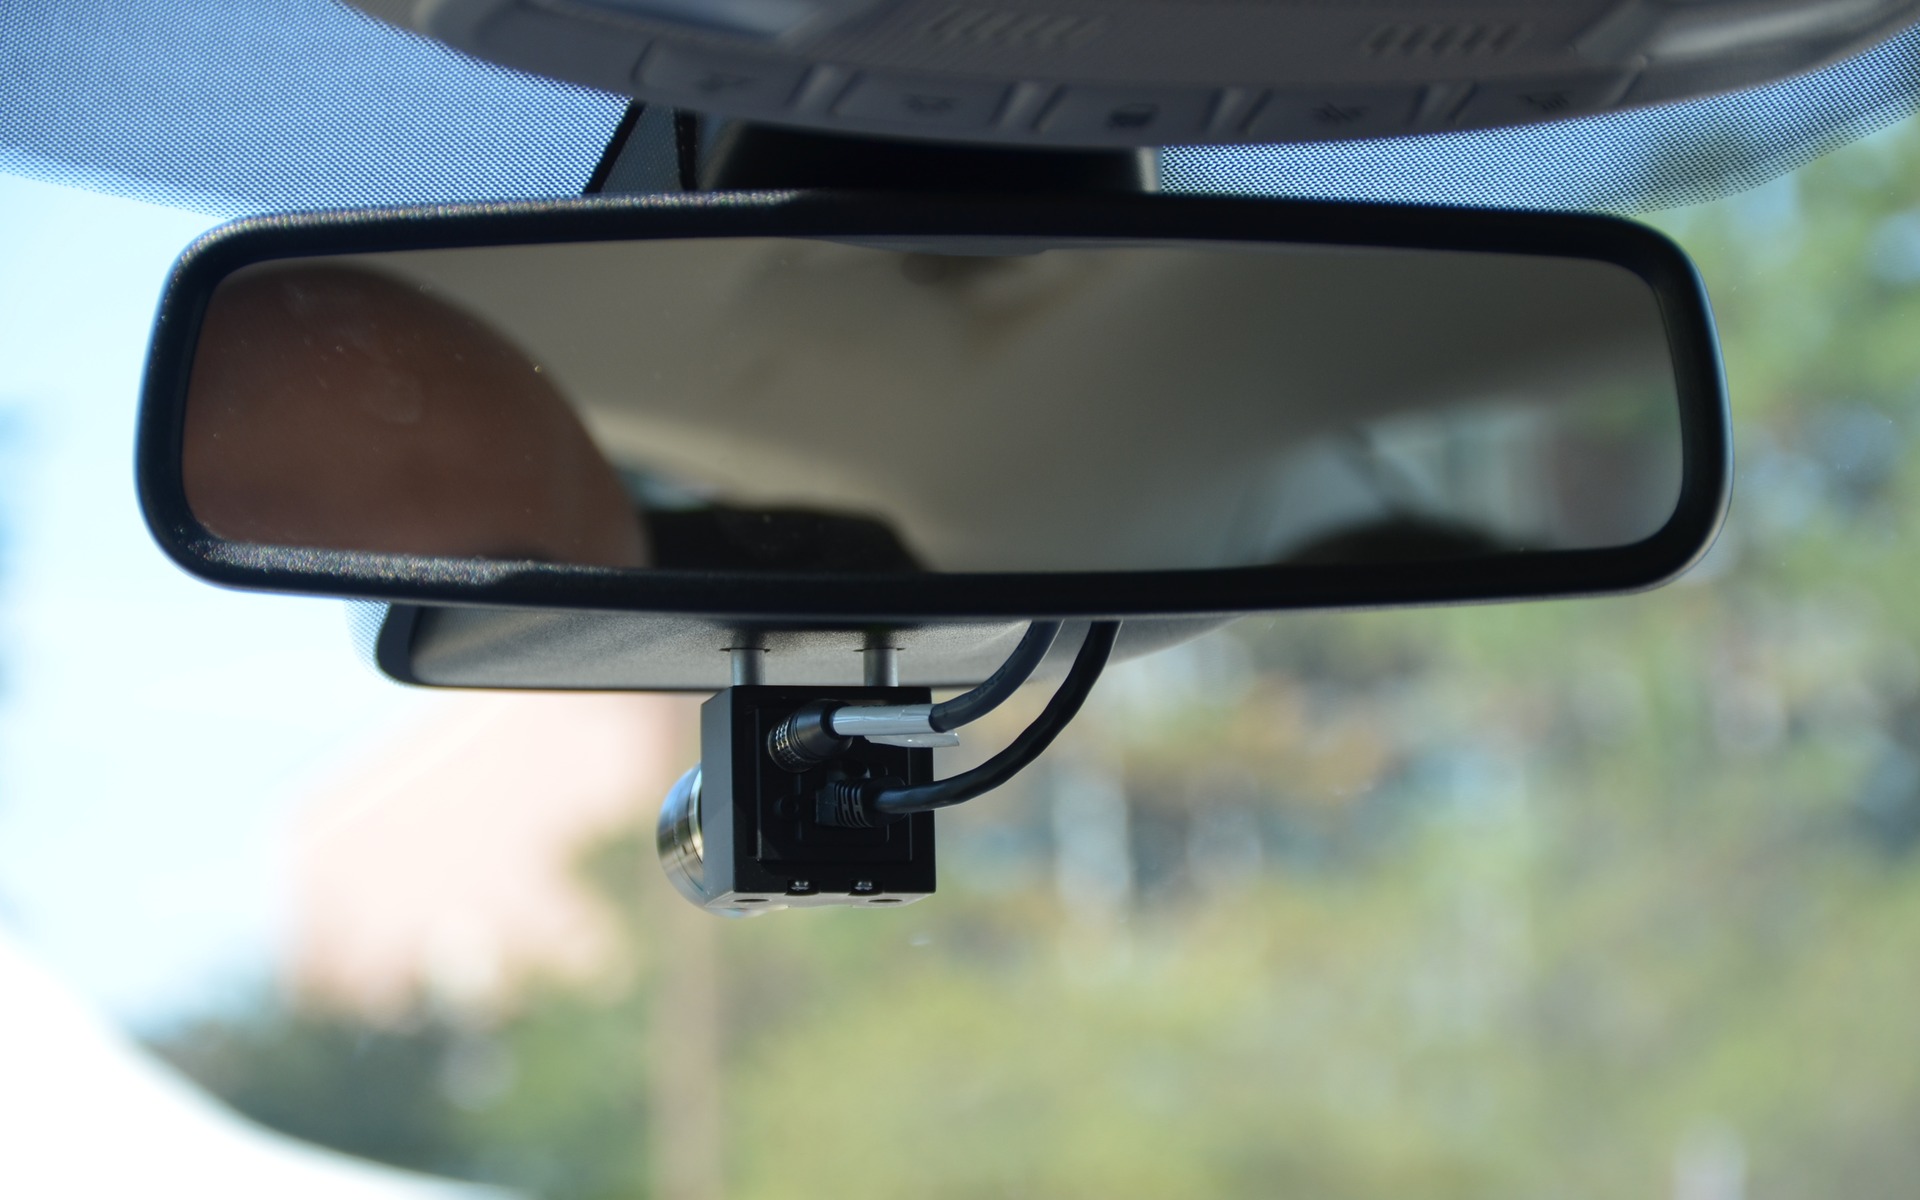 Another camera for detection – this one is inside the car.